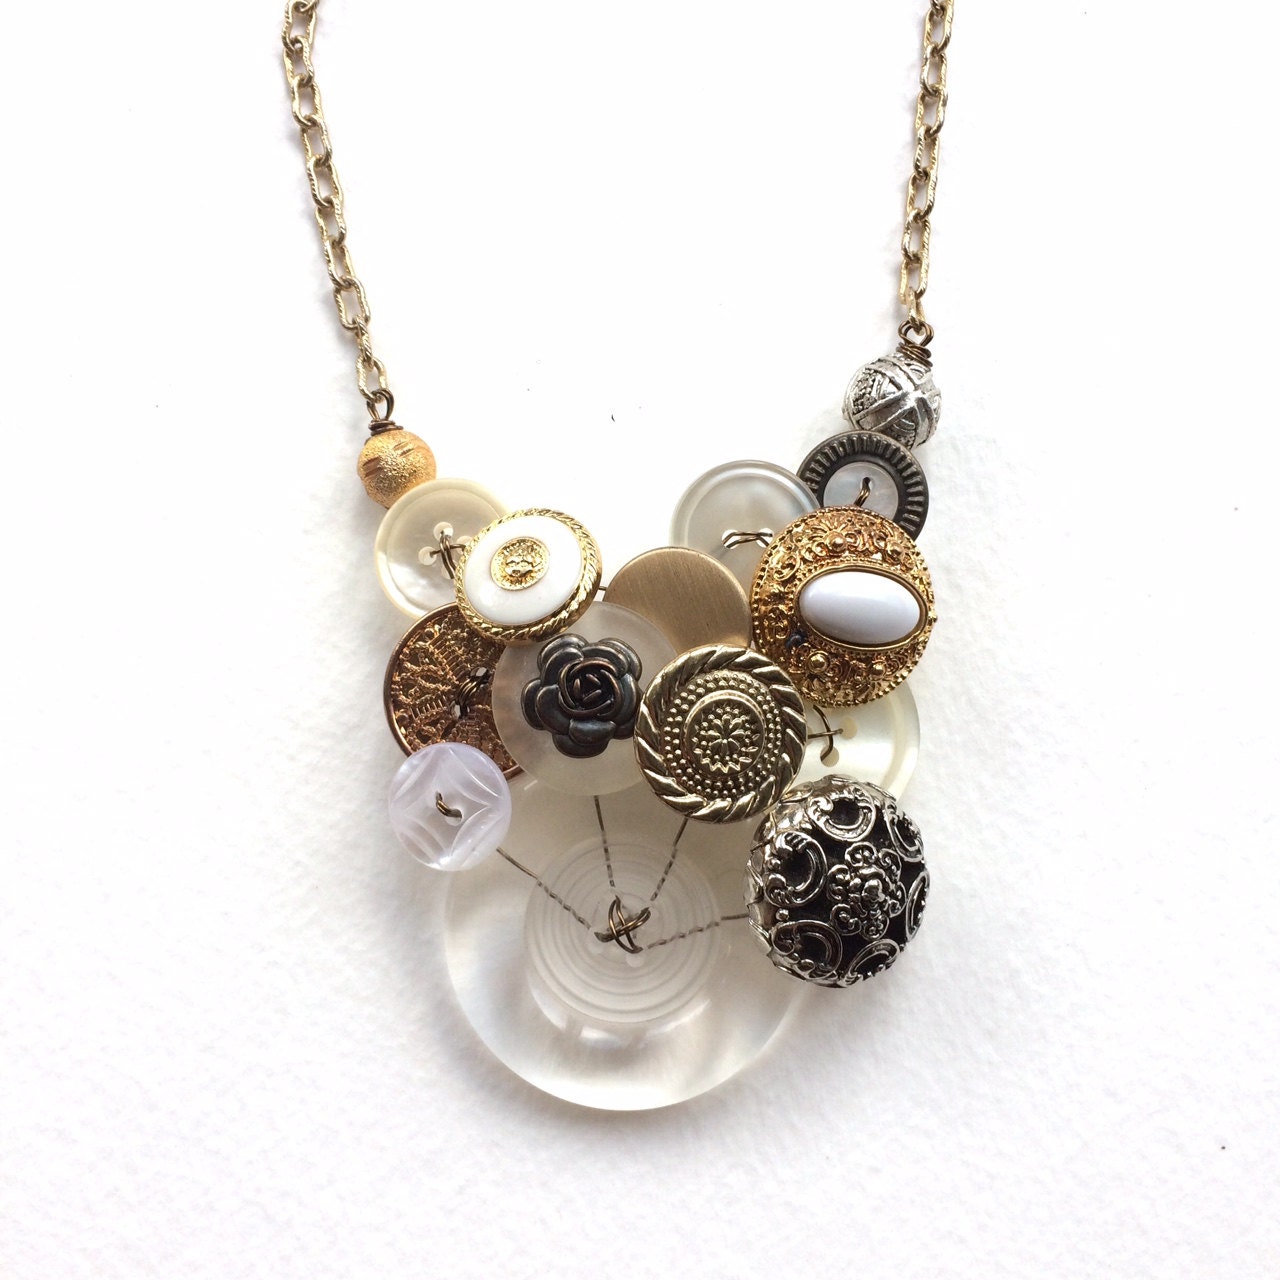 Big Statement Necklace with white and mixed metal vintage